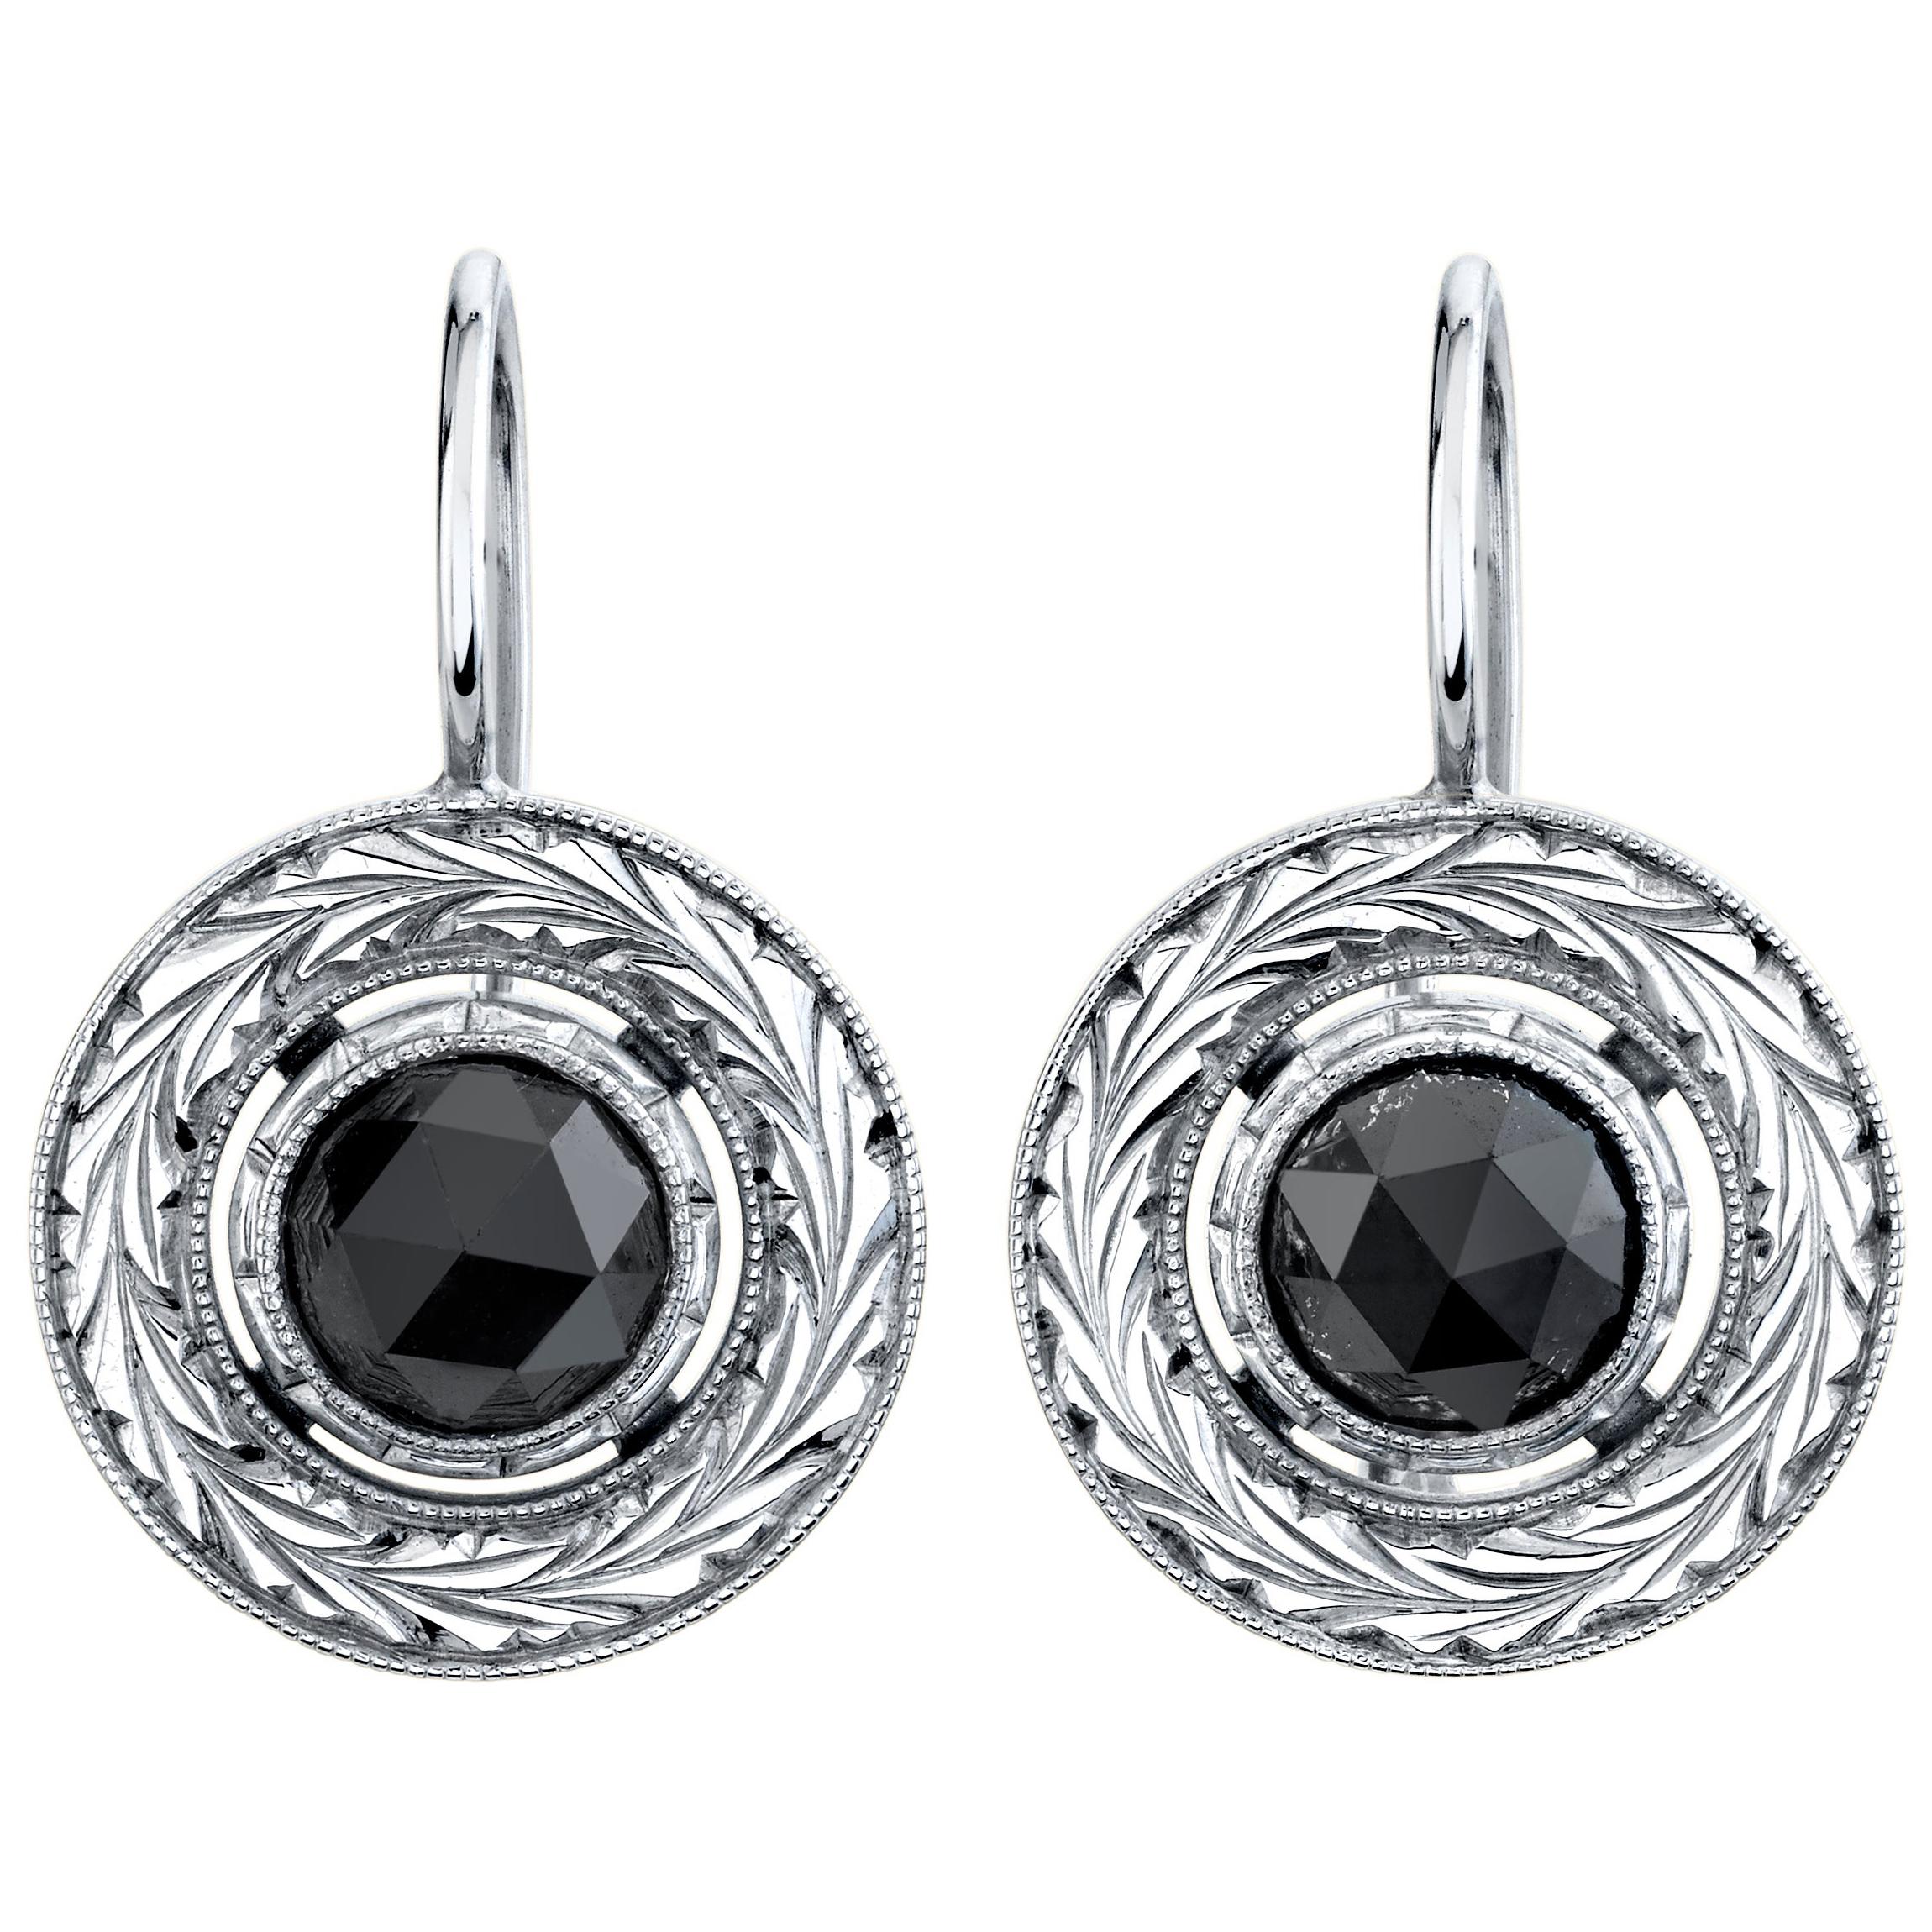 Rose Cut Black Diamond Engraved Drop Earrings in White Gold, 2.42 Carats Total For Sale